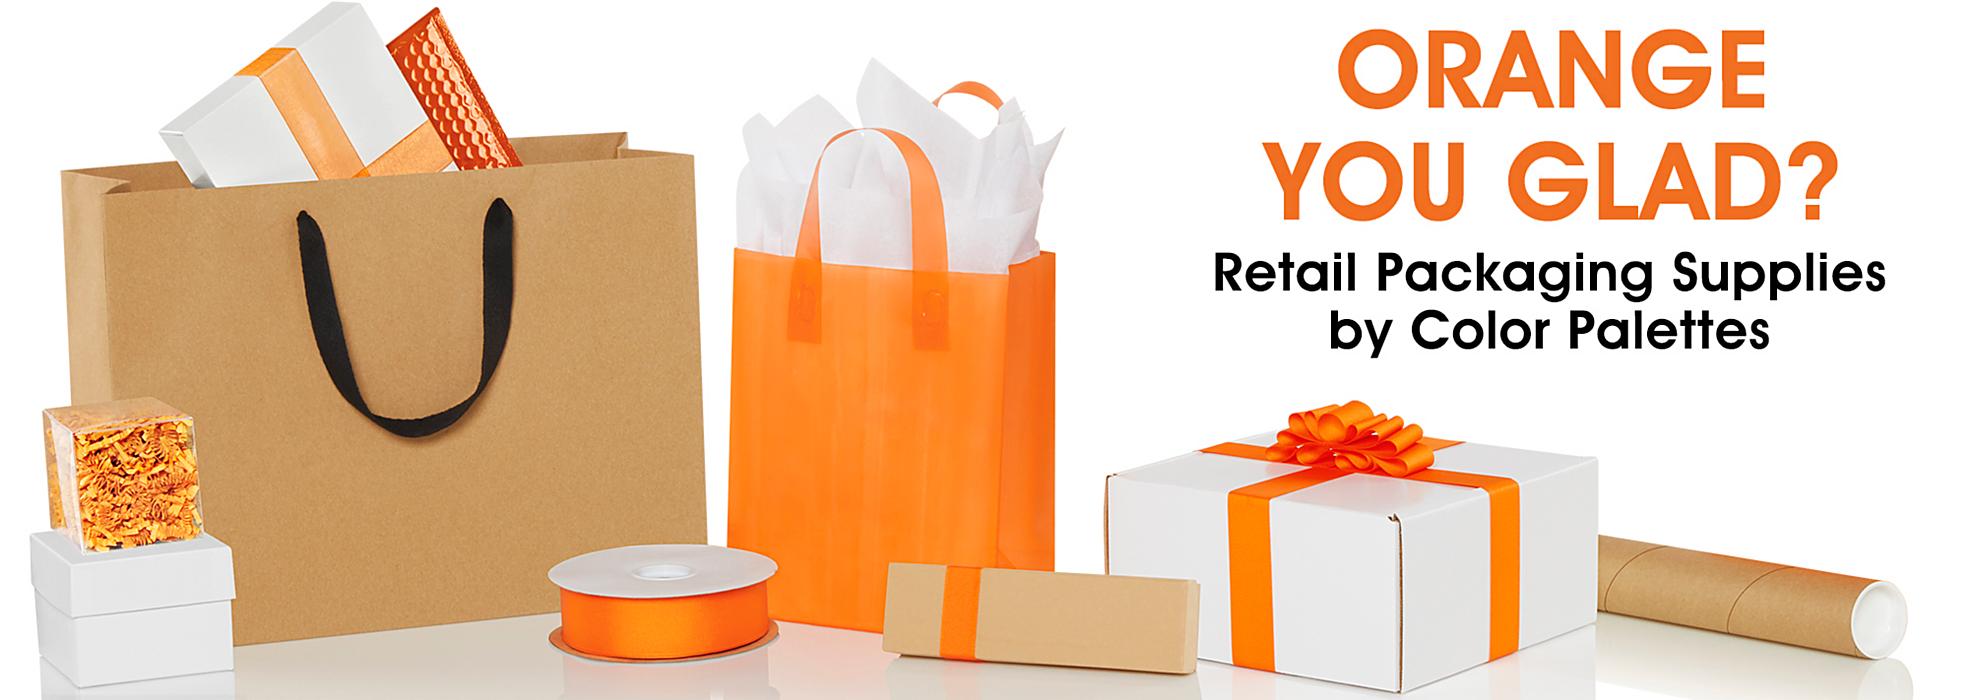 Orange You Glad? - Retail Packaging Supplies by Color Palettes